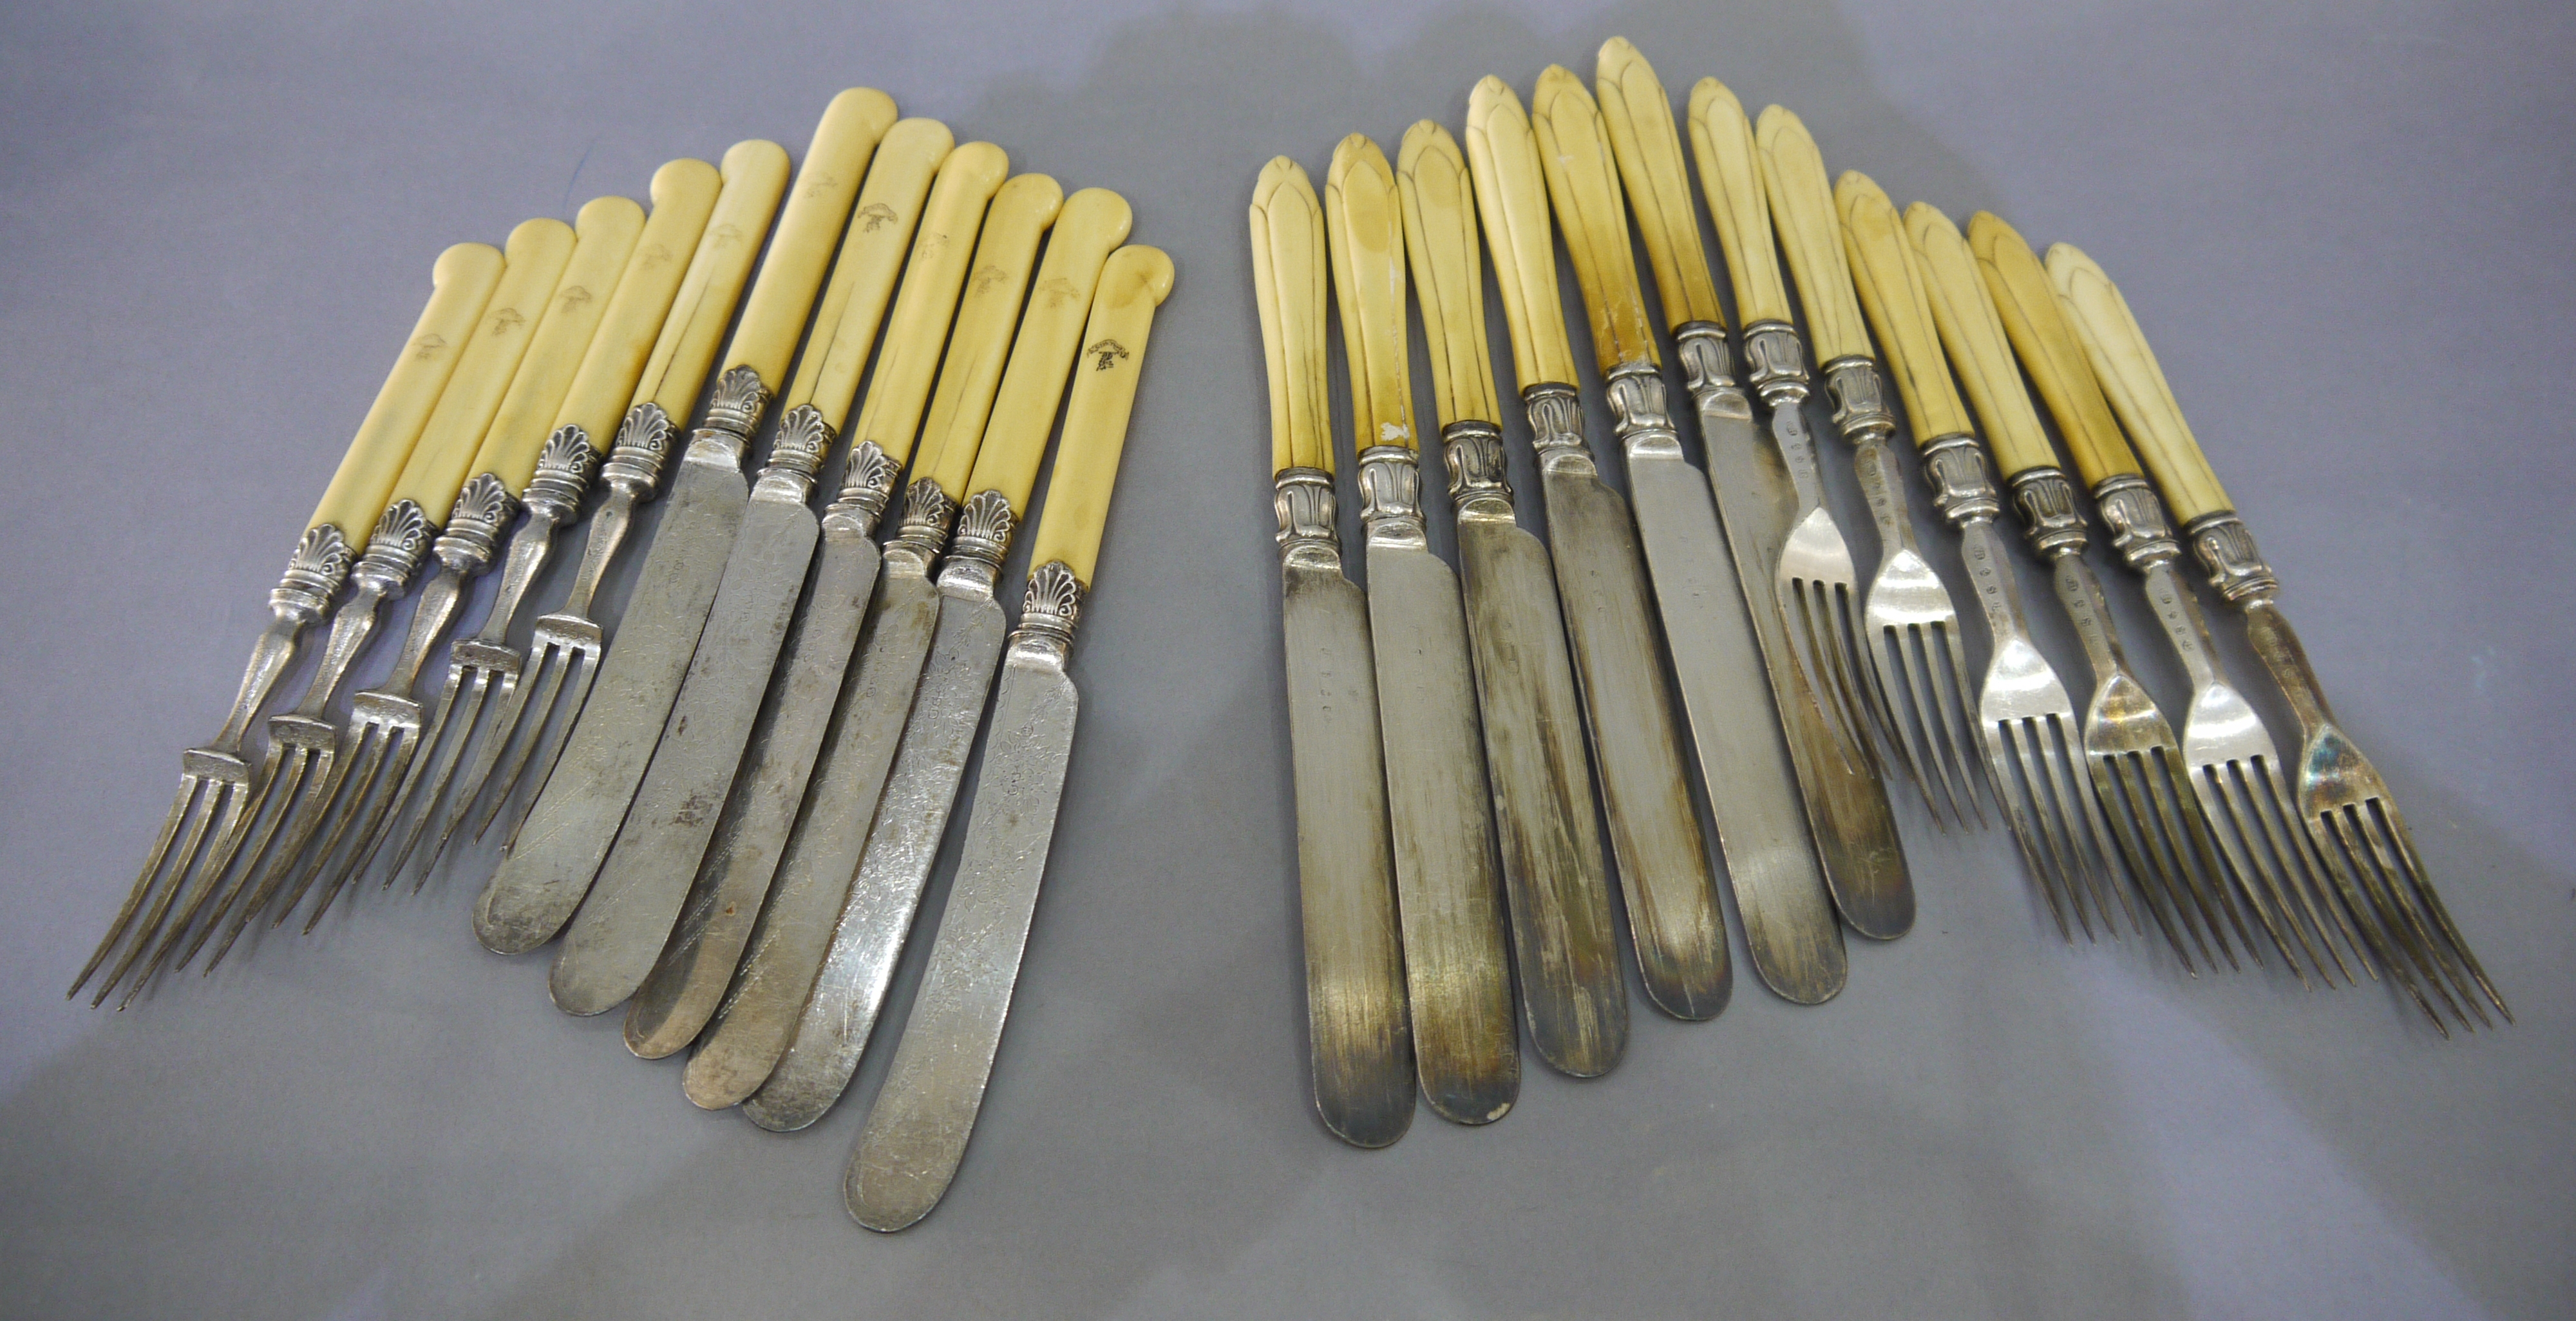 Two sets of dessert knives and forks, - Image 2 of 2